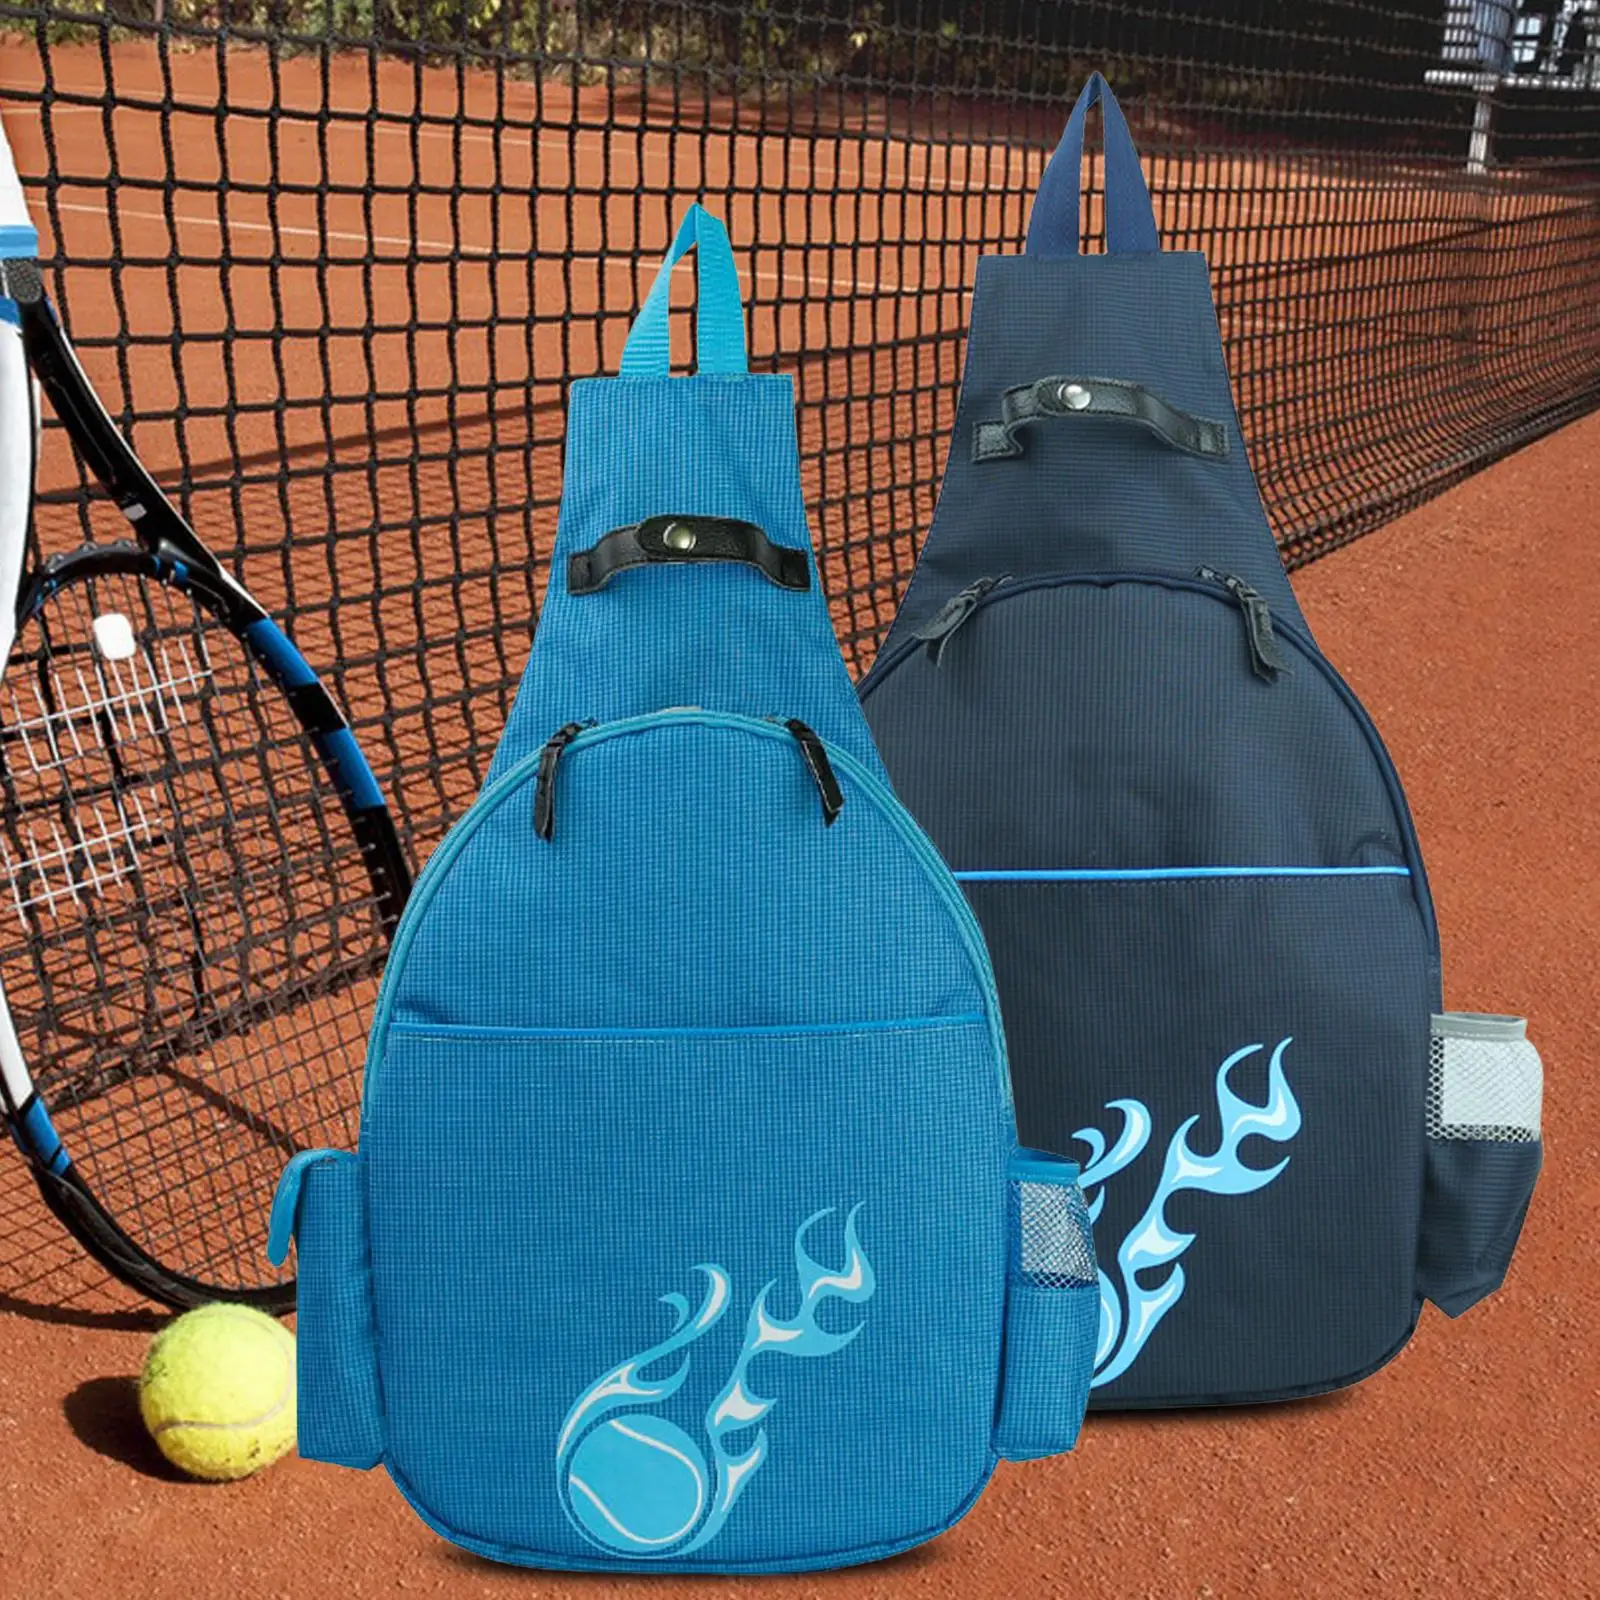 Tennis Racquet Backpack Tennis Backpack for Outdoor Sports Pickleball Squash